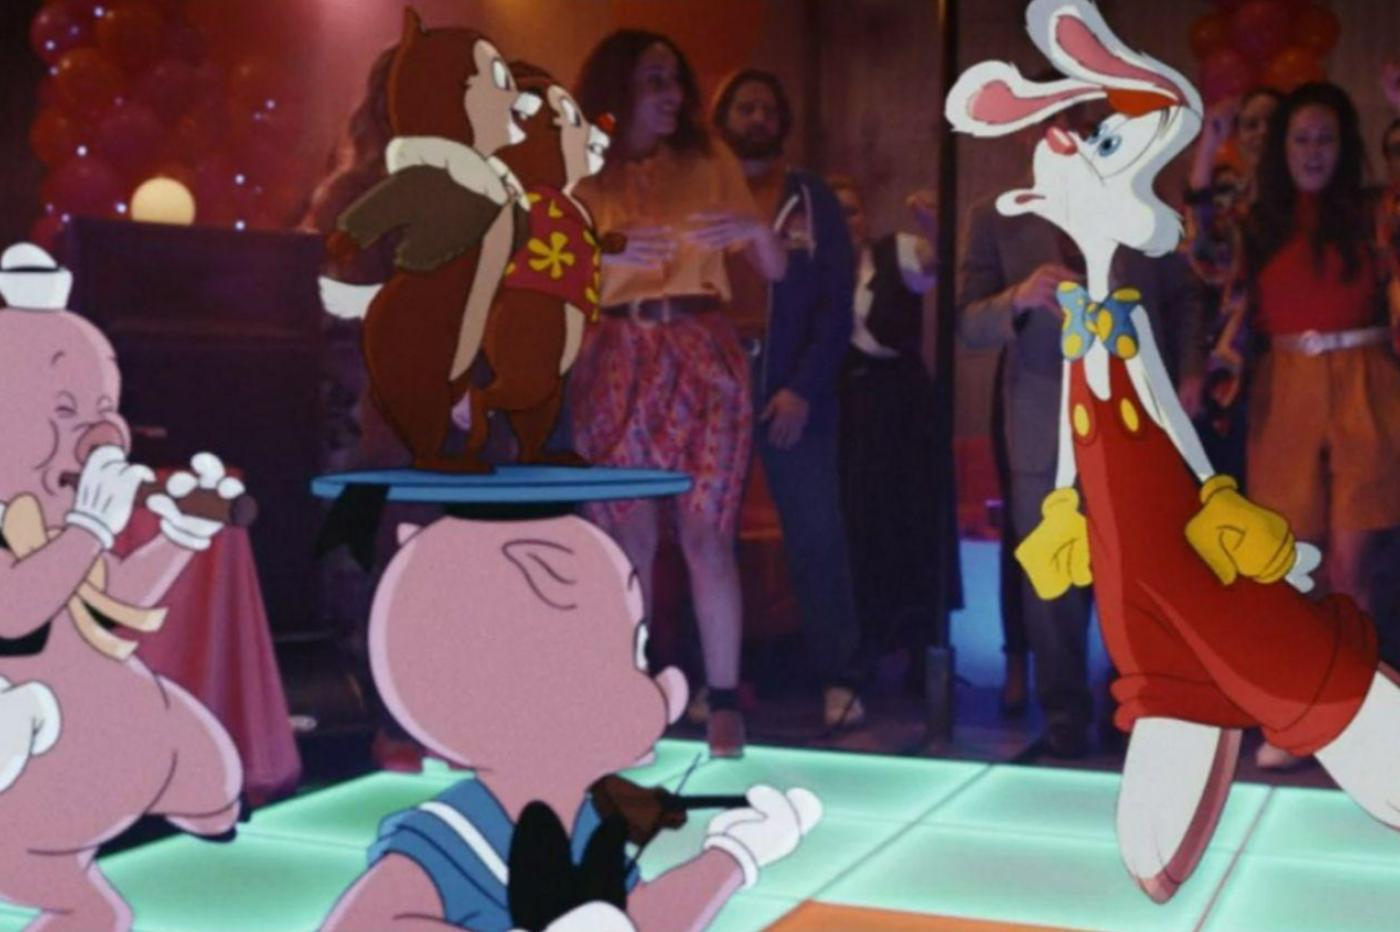 Screenshot from the movie with Tic and Tac partying with the Three Little Pigs and Roger Rabbit